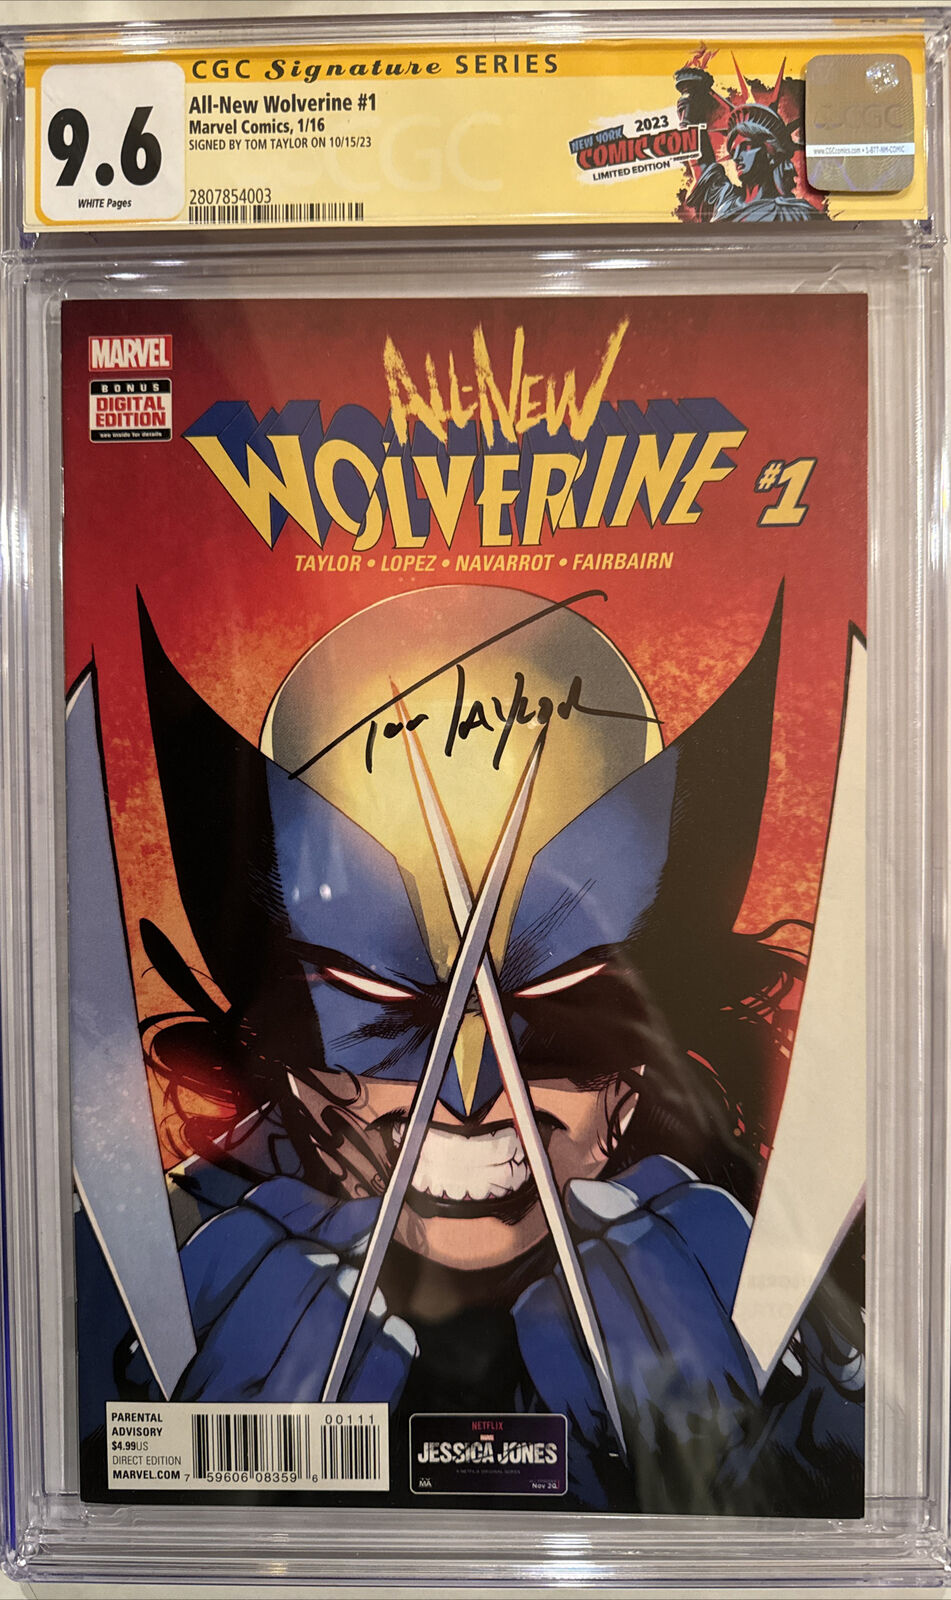 All-New Wolverine #1 2016 Signed By Tom Taylor CGC 9.6 Laura Kinney As Wolverine